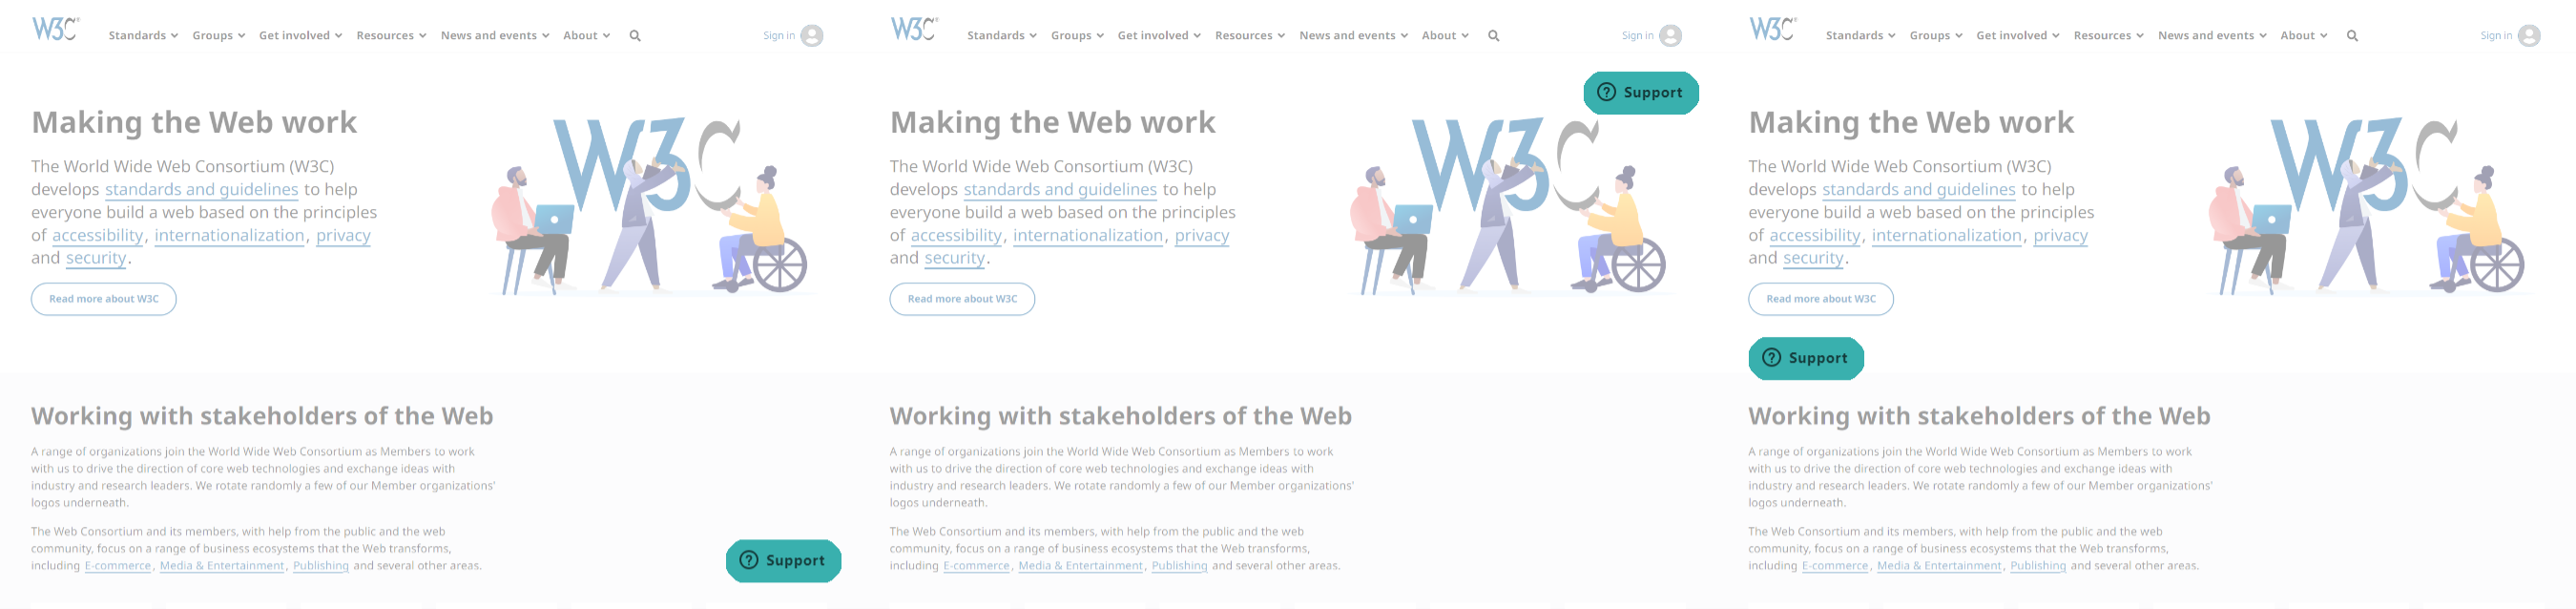 Three views of the same webpage (the W3C homepage, overlaid with a semi-transparent white layer to deemphasise it), with a floating 'Support' button in three different positions